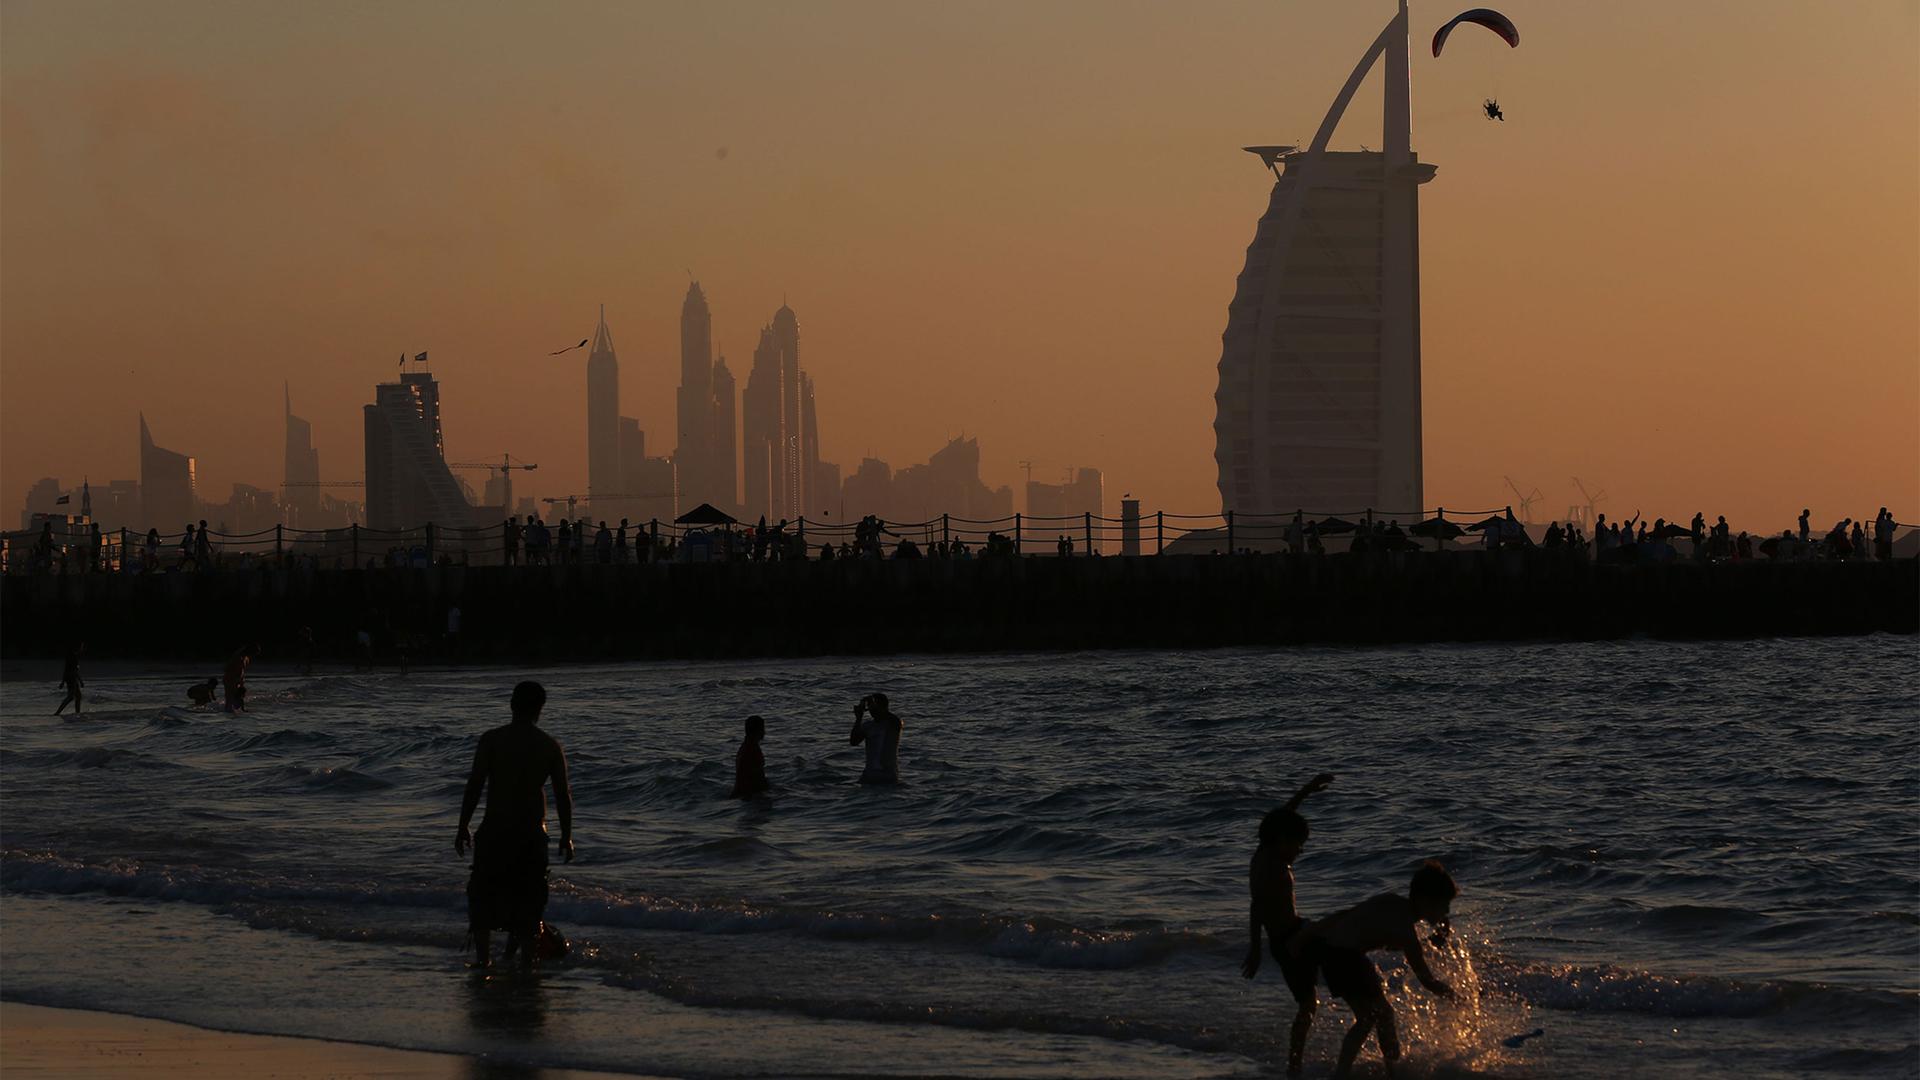 Children play in the surf at Kite Beach with the Burj al Arab, the Dubai Marina and a man flying a powered parachute in the background in Dubai, United Arab Emirates, Jan. 8, 2016.